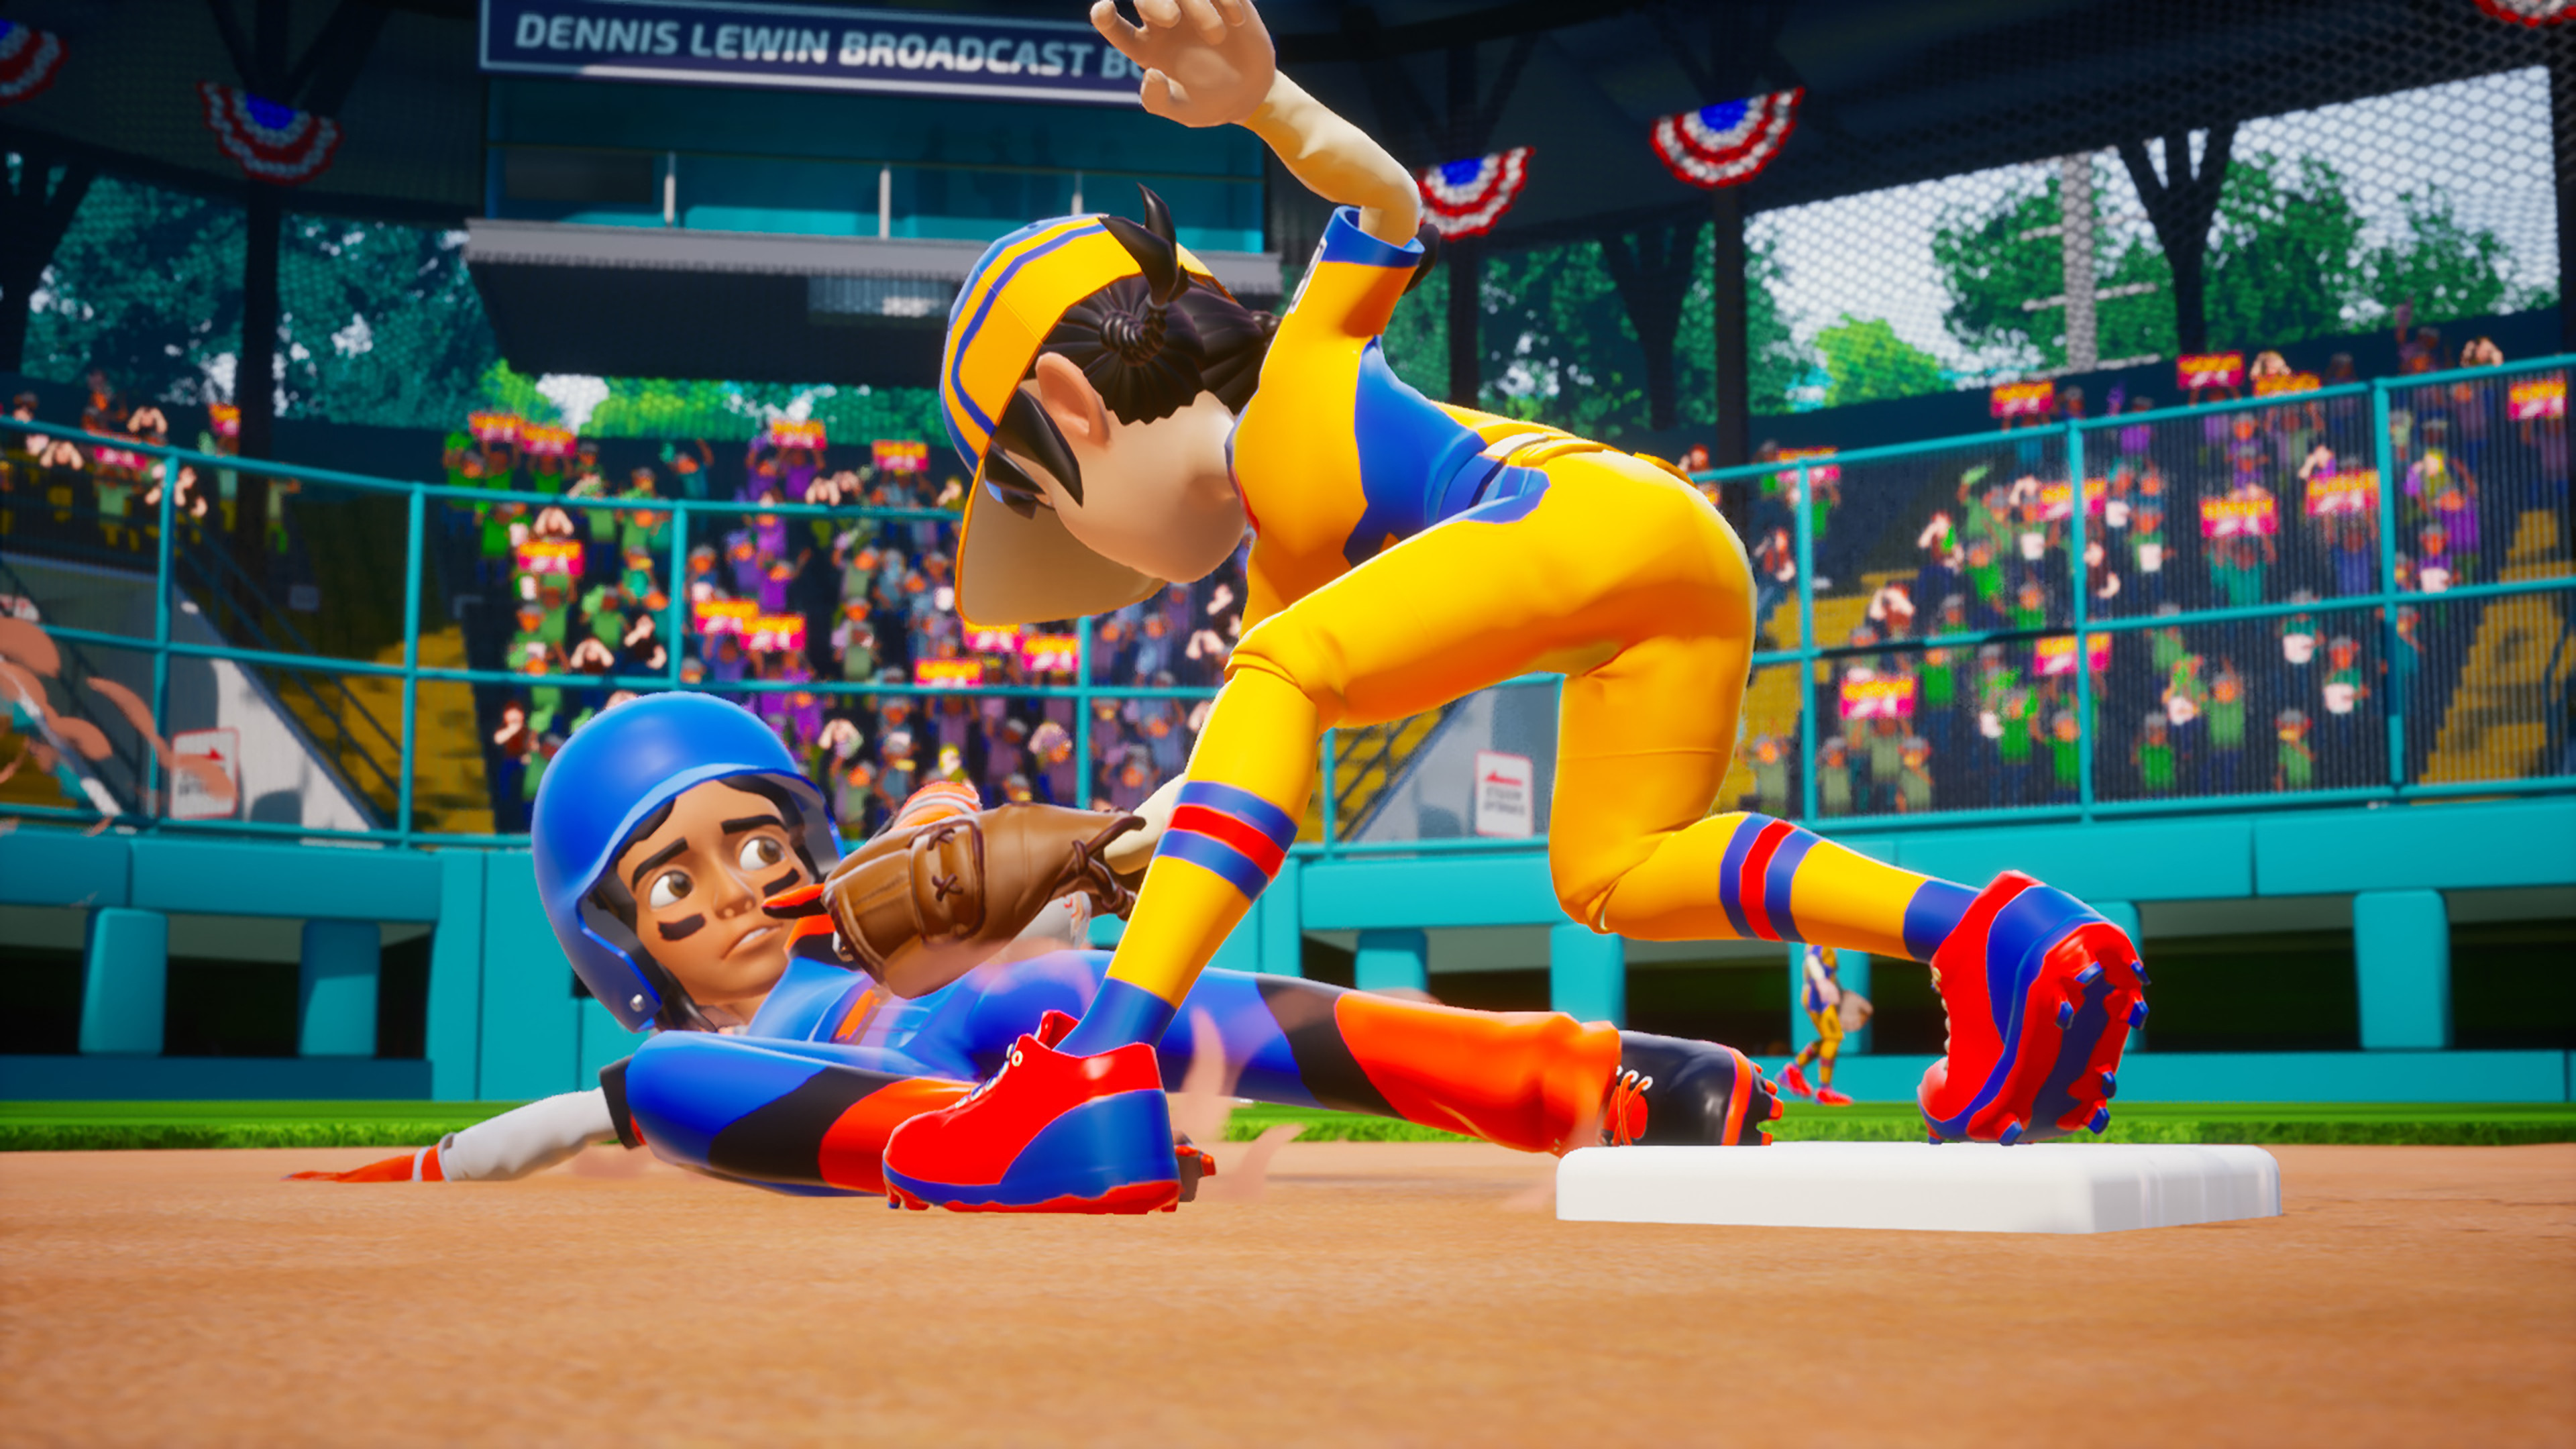 Little League World Series Baseball 2022 Free Download for PC